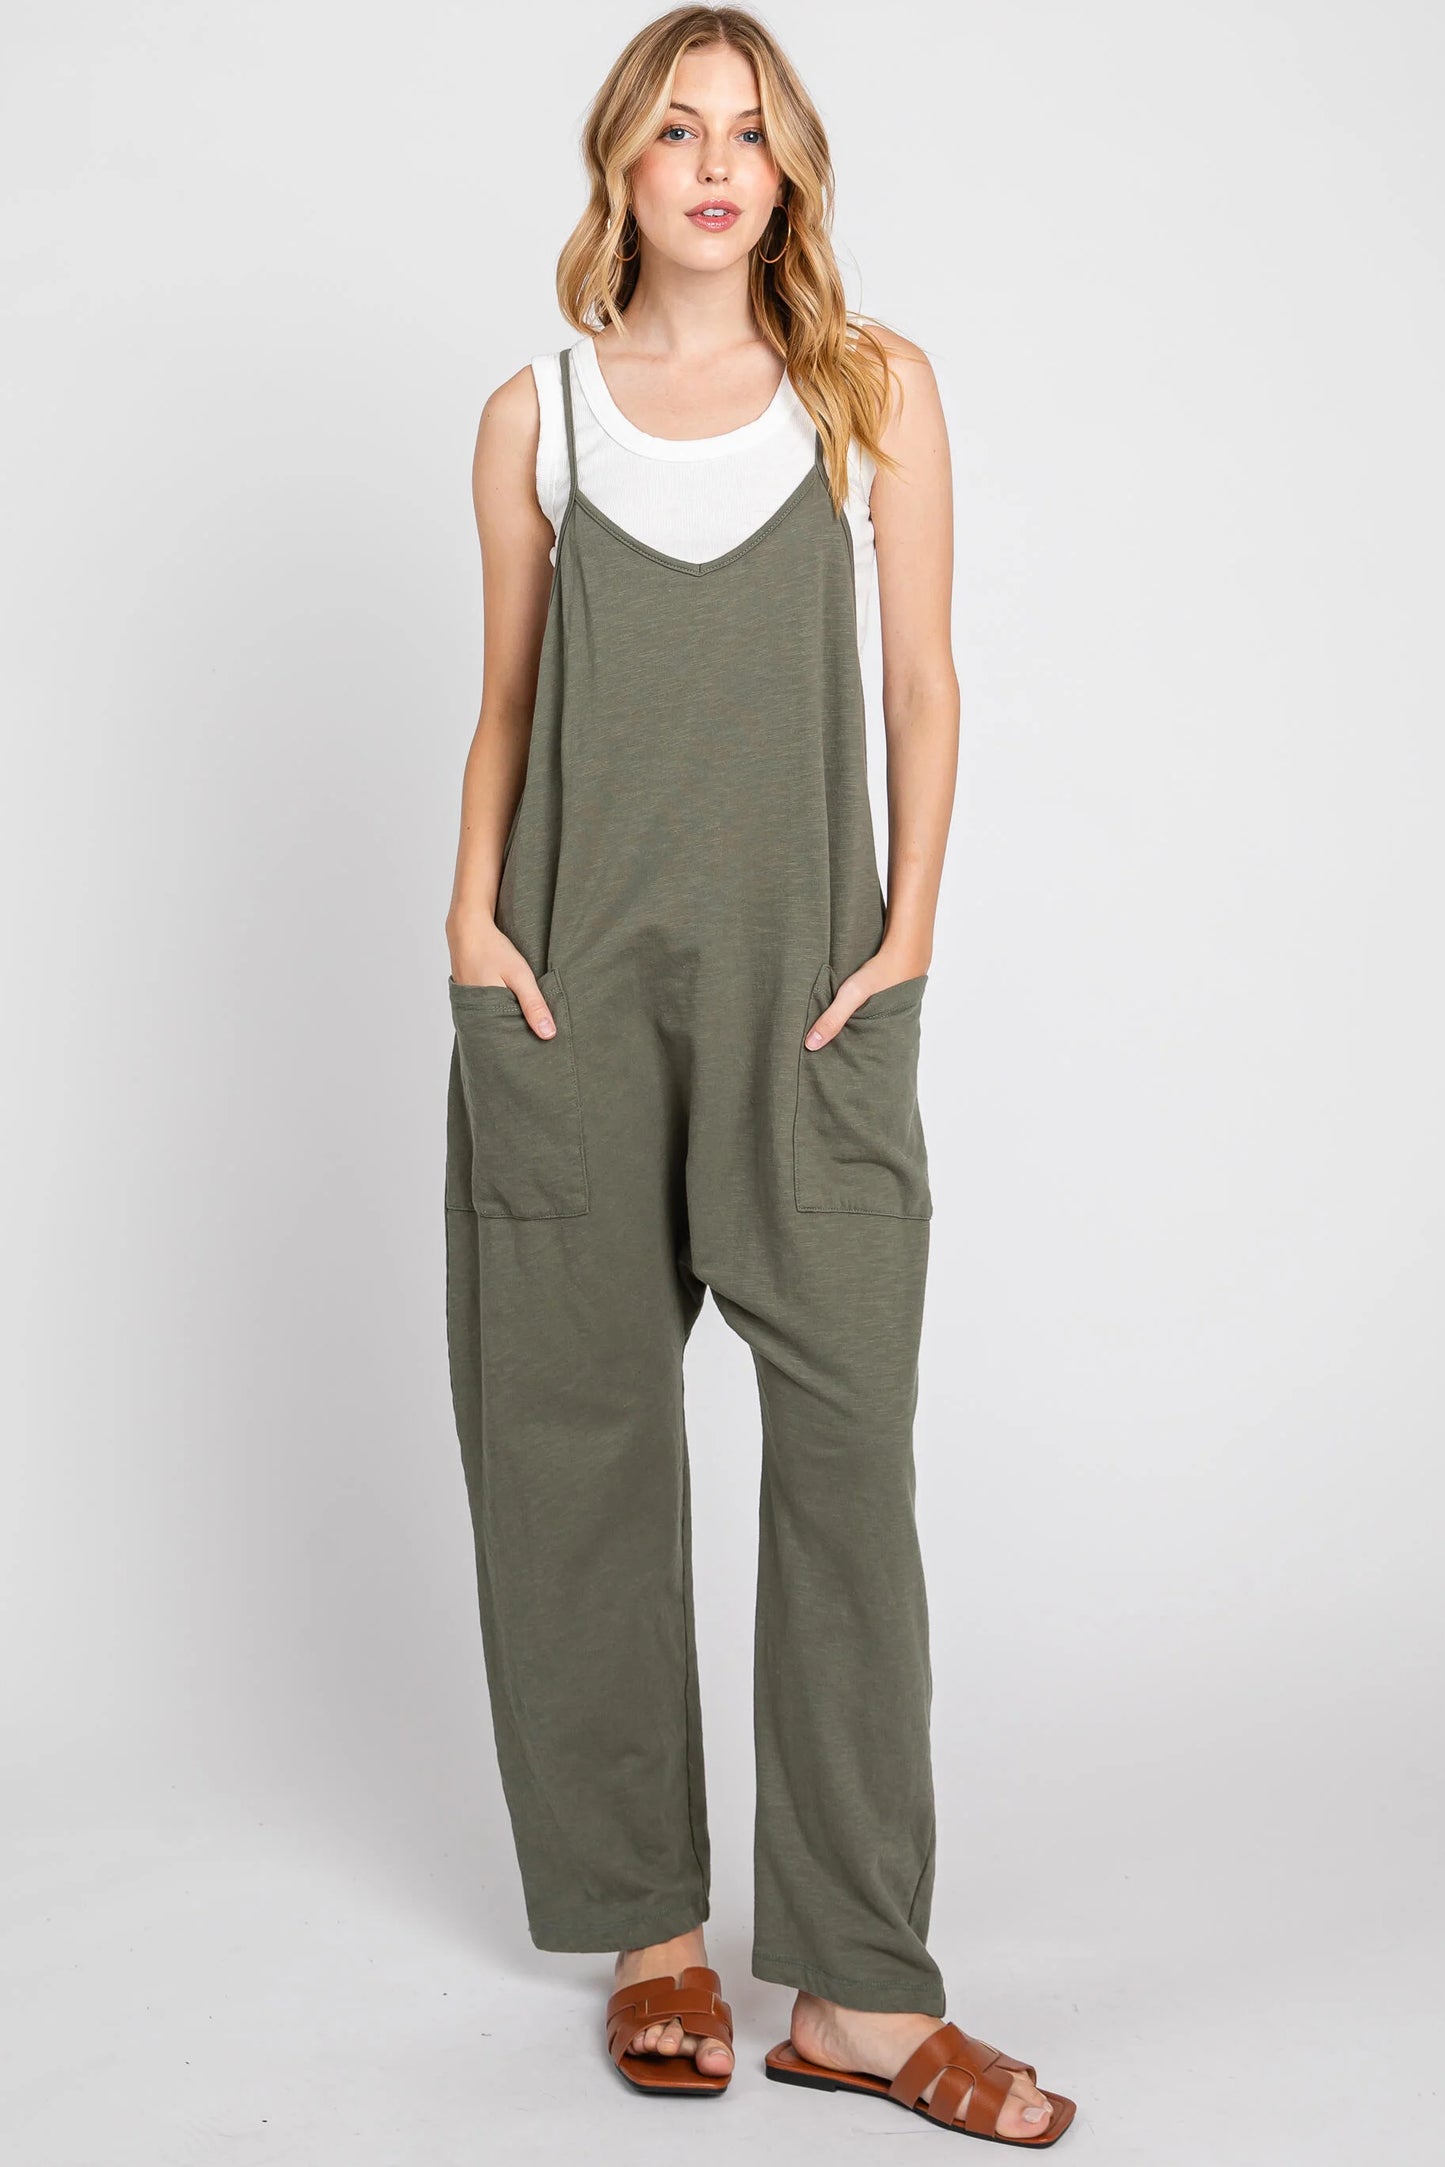 Final Touch French Terry Jumpsuit: 100% Cotton with Front Patch Pocket - Made in USA